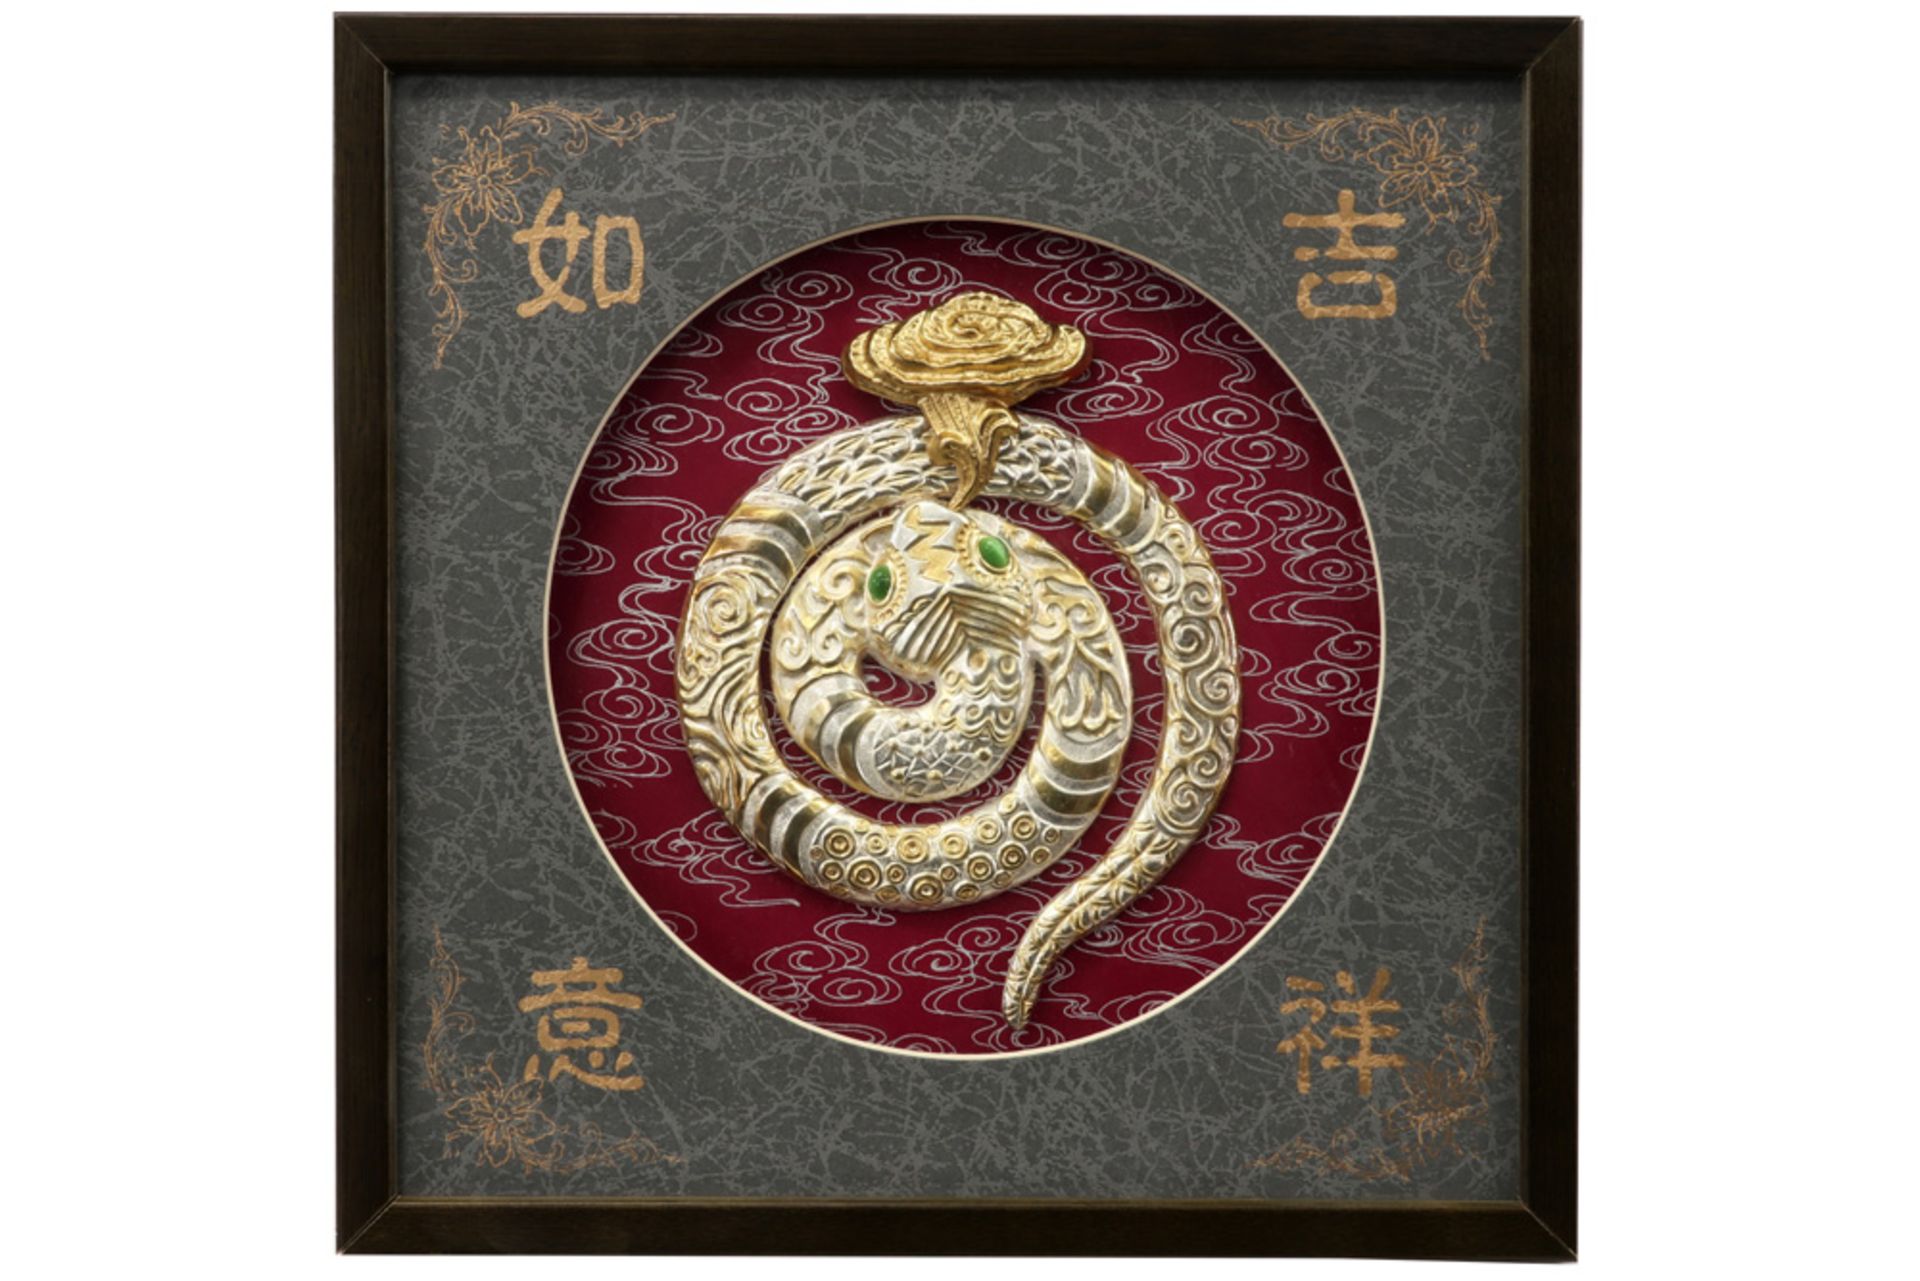 Chinese Snake horoscope sign - an edition of 100 with its certificate and box ||Chinees